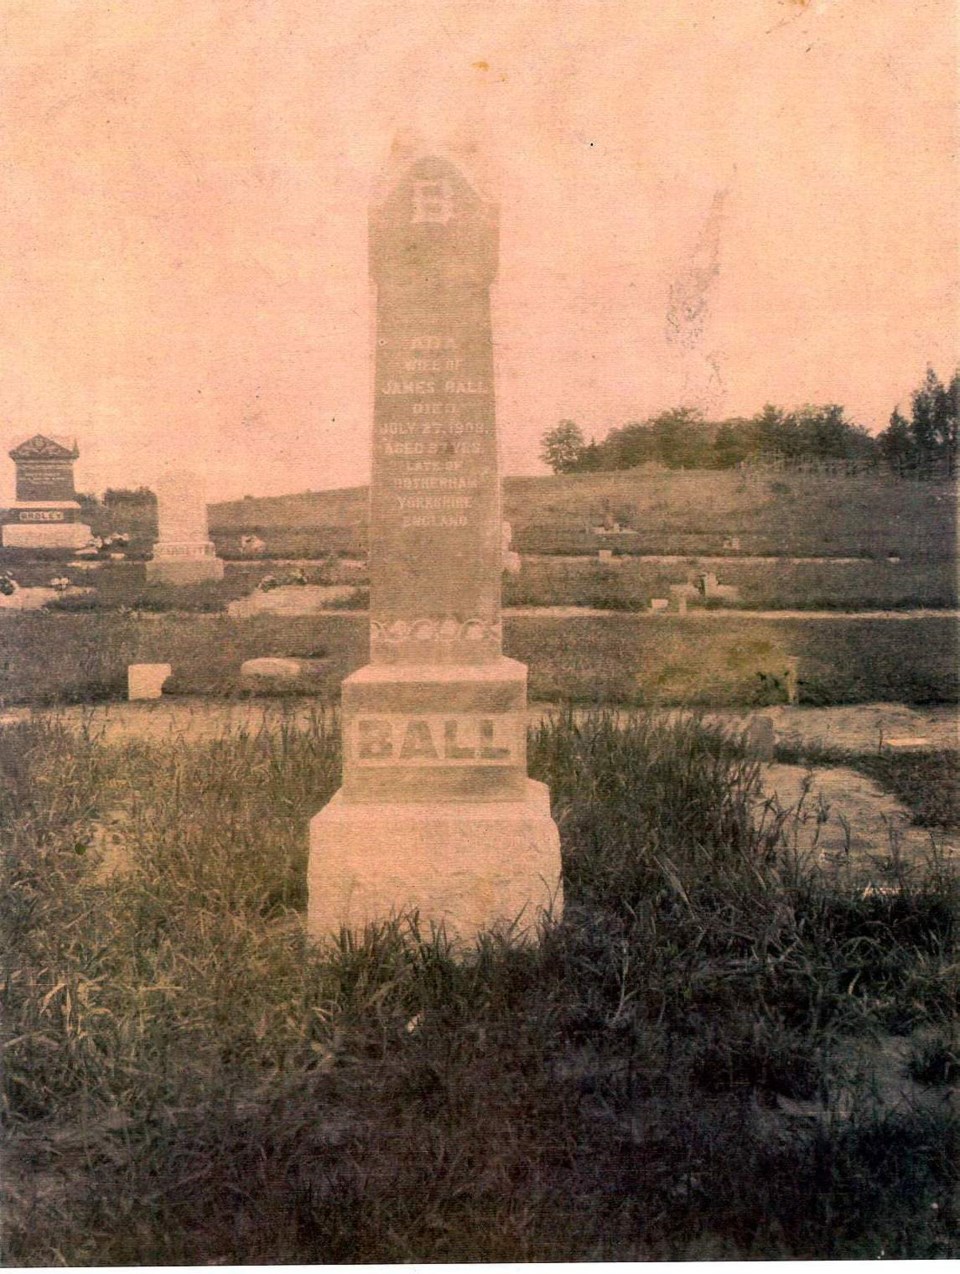 james-ball-monument-1908-lakeview-cemetery